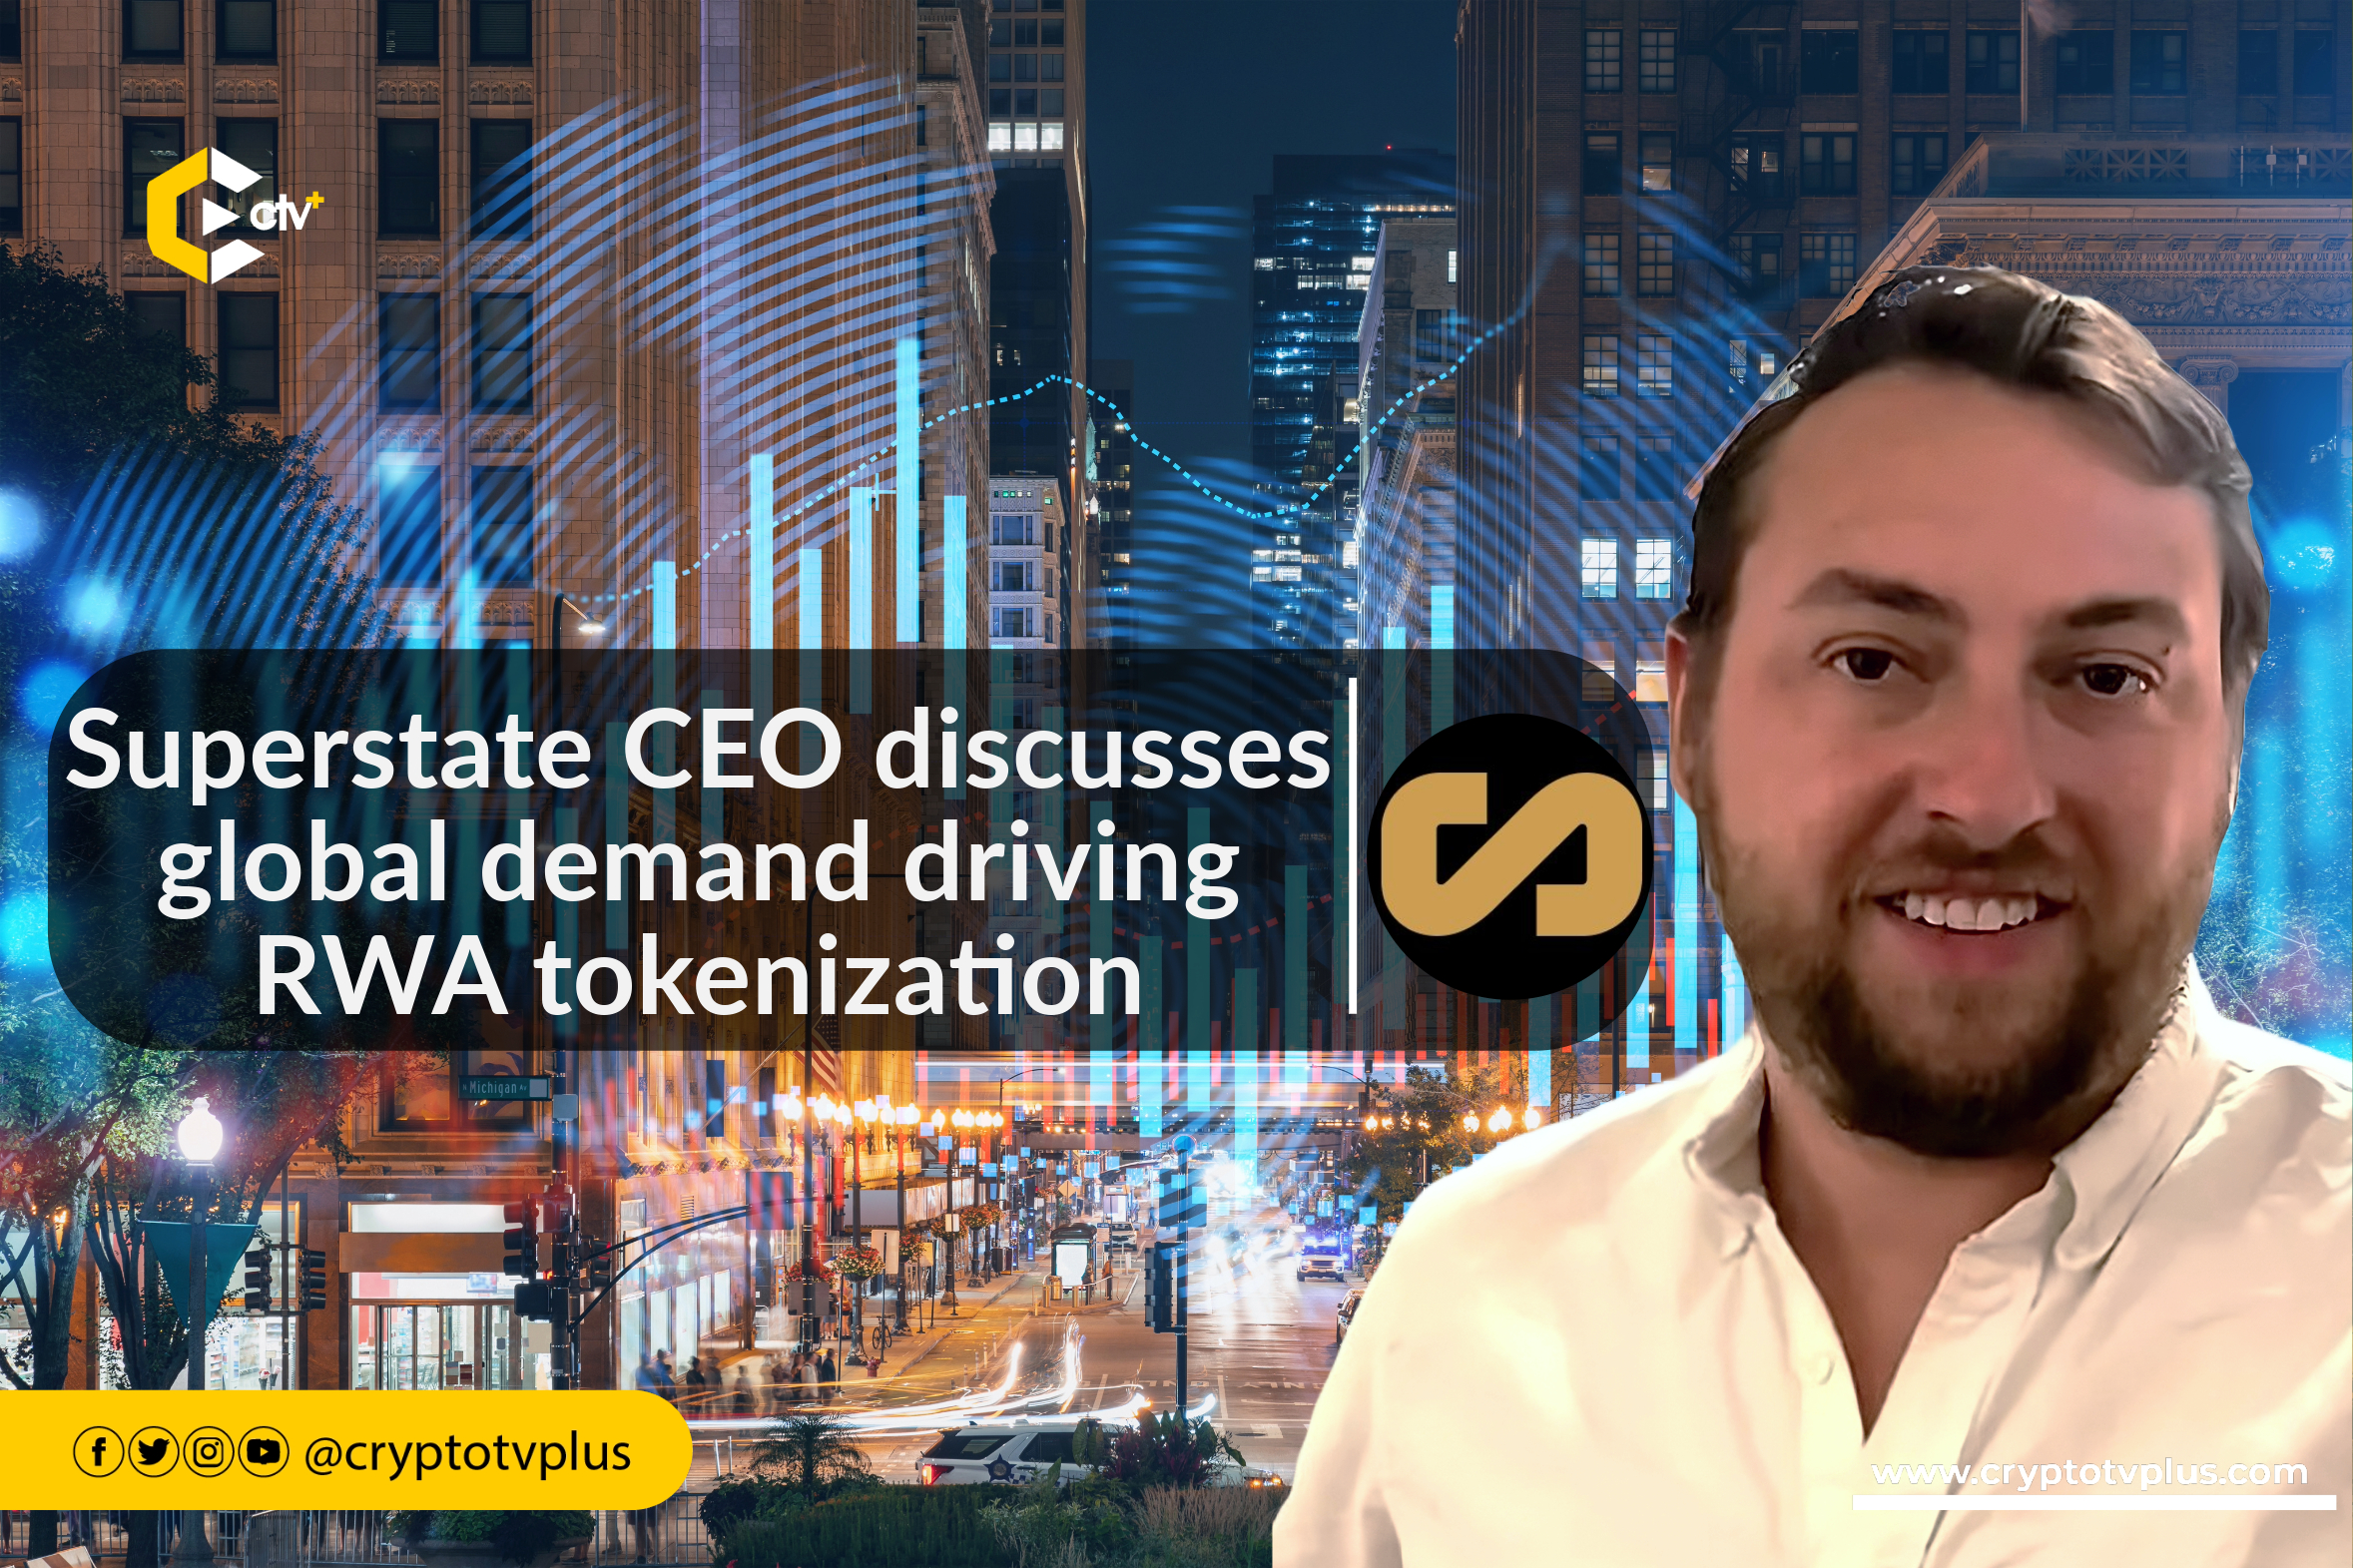 Superstate CEO discusses global demand driving RWA tokenization